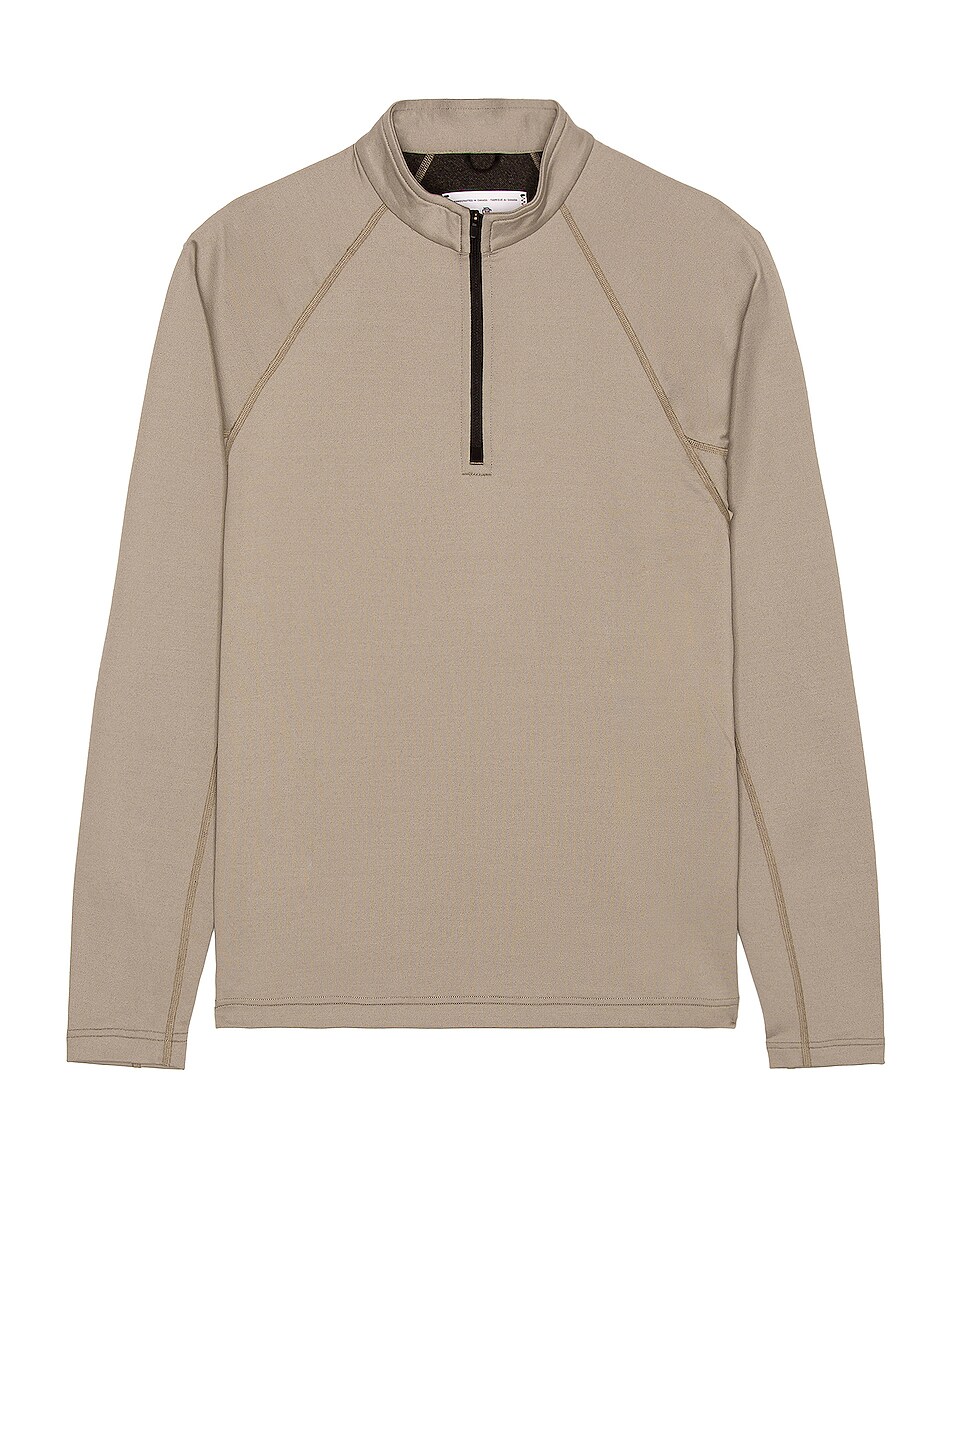 Image 1 of Reigning Champ Half Zip in Concrete